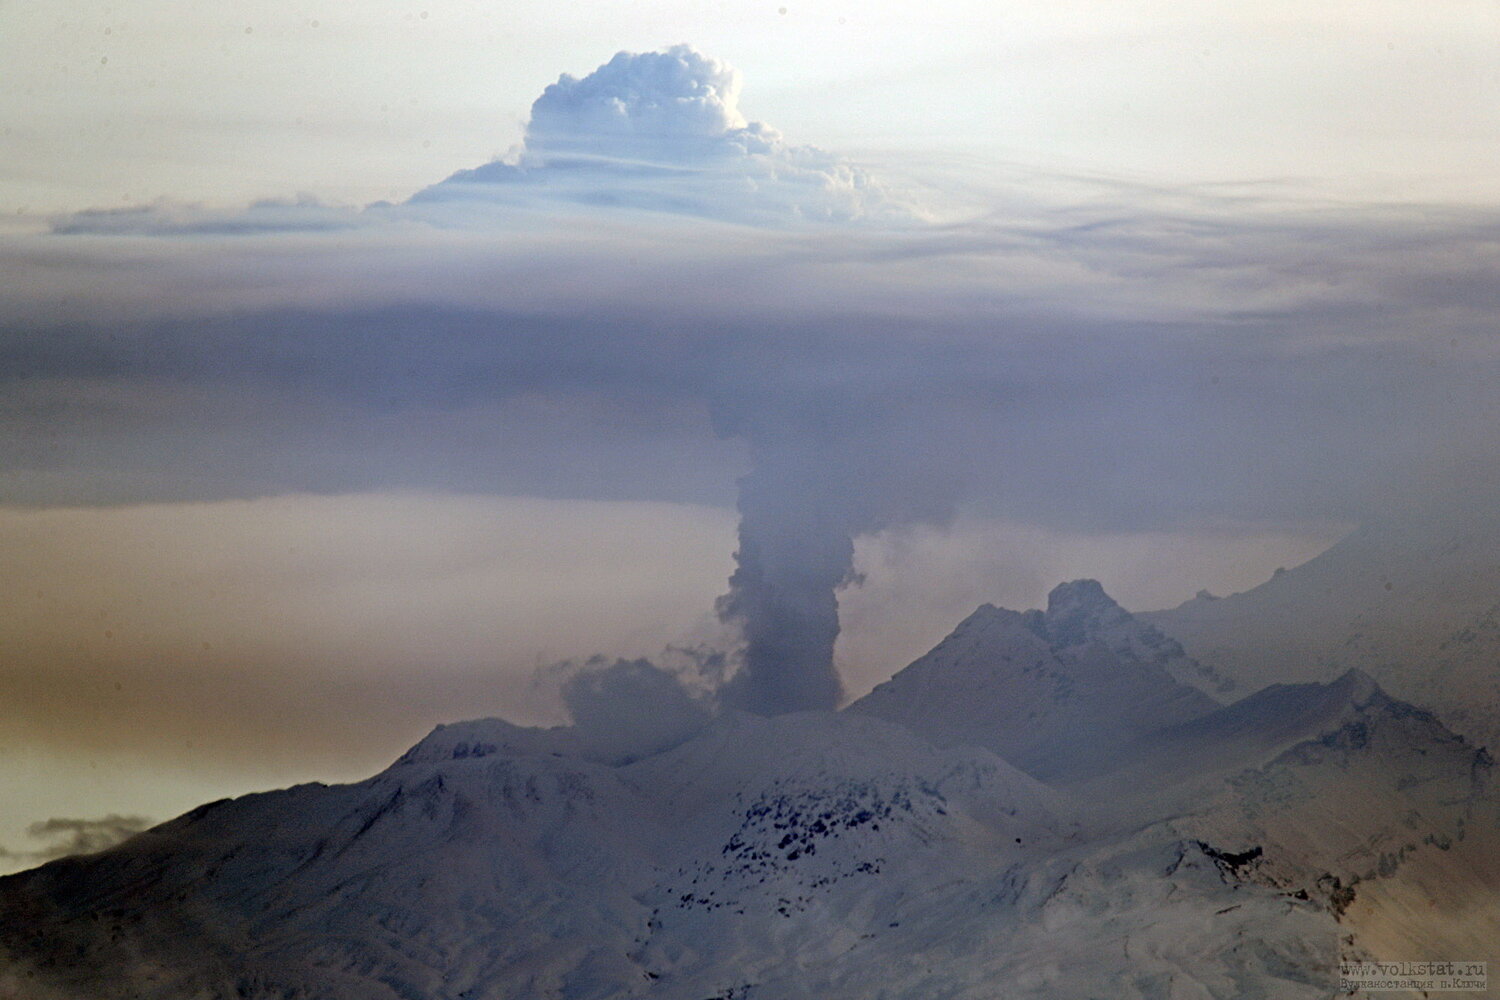 The 2-km eruption plume from the Karan dome on 30 April (image: volkstat.ru)